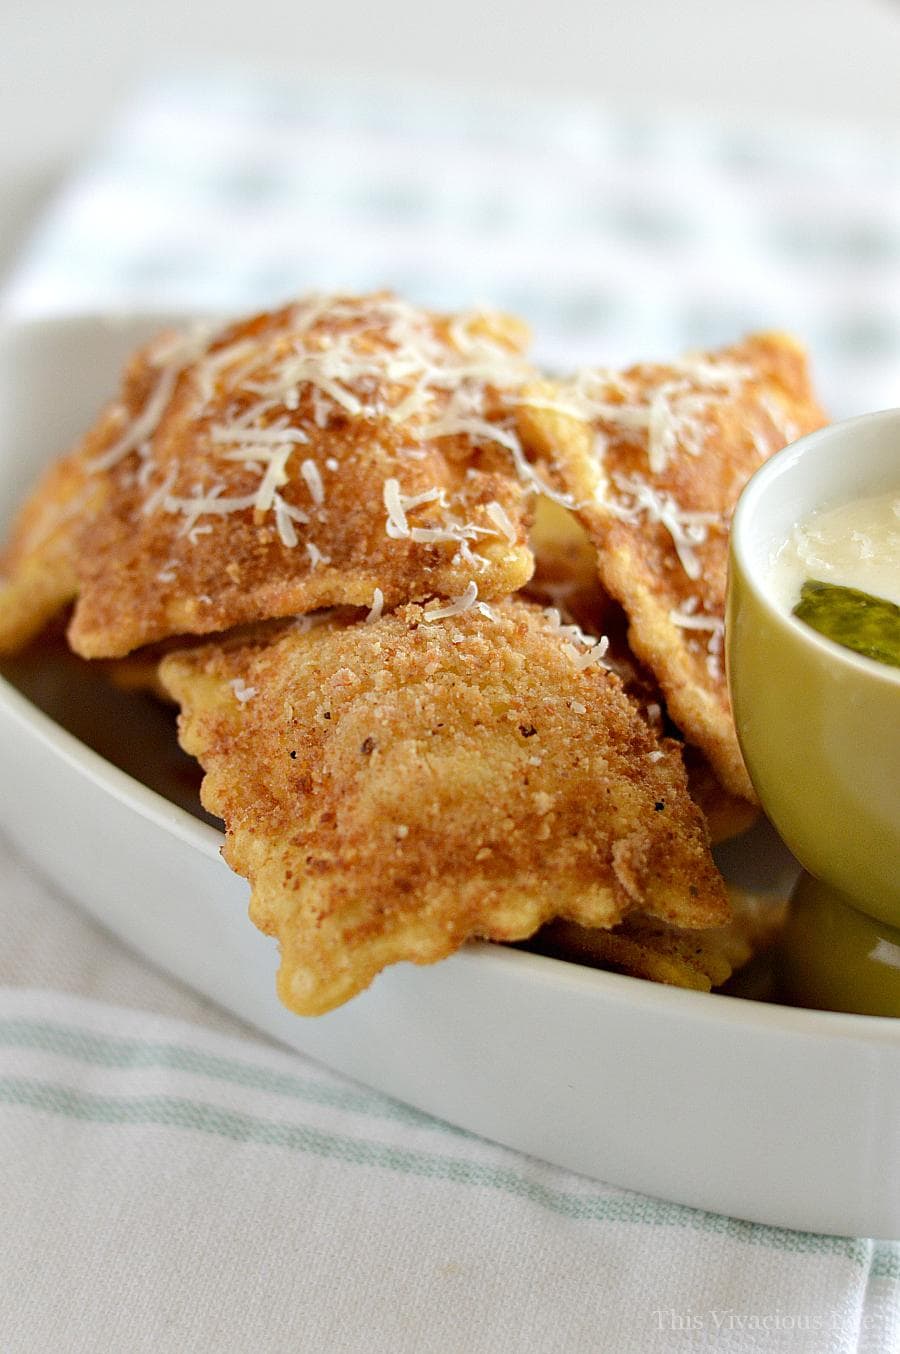 These gluten-free fried ravioli are sure to be your new favorite appetizer to serve up to friends and family.